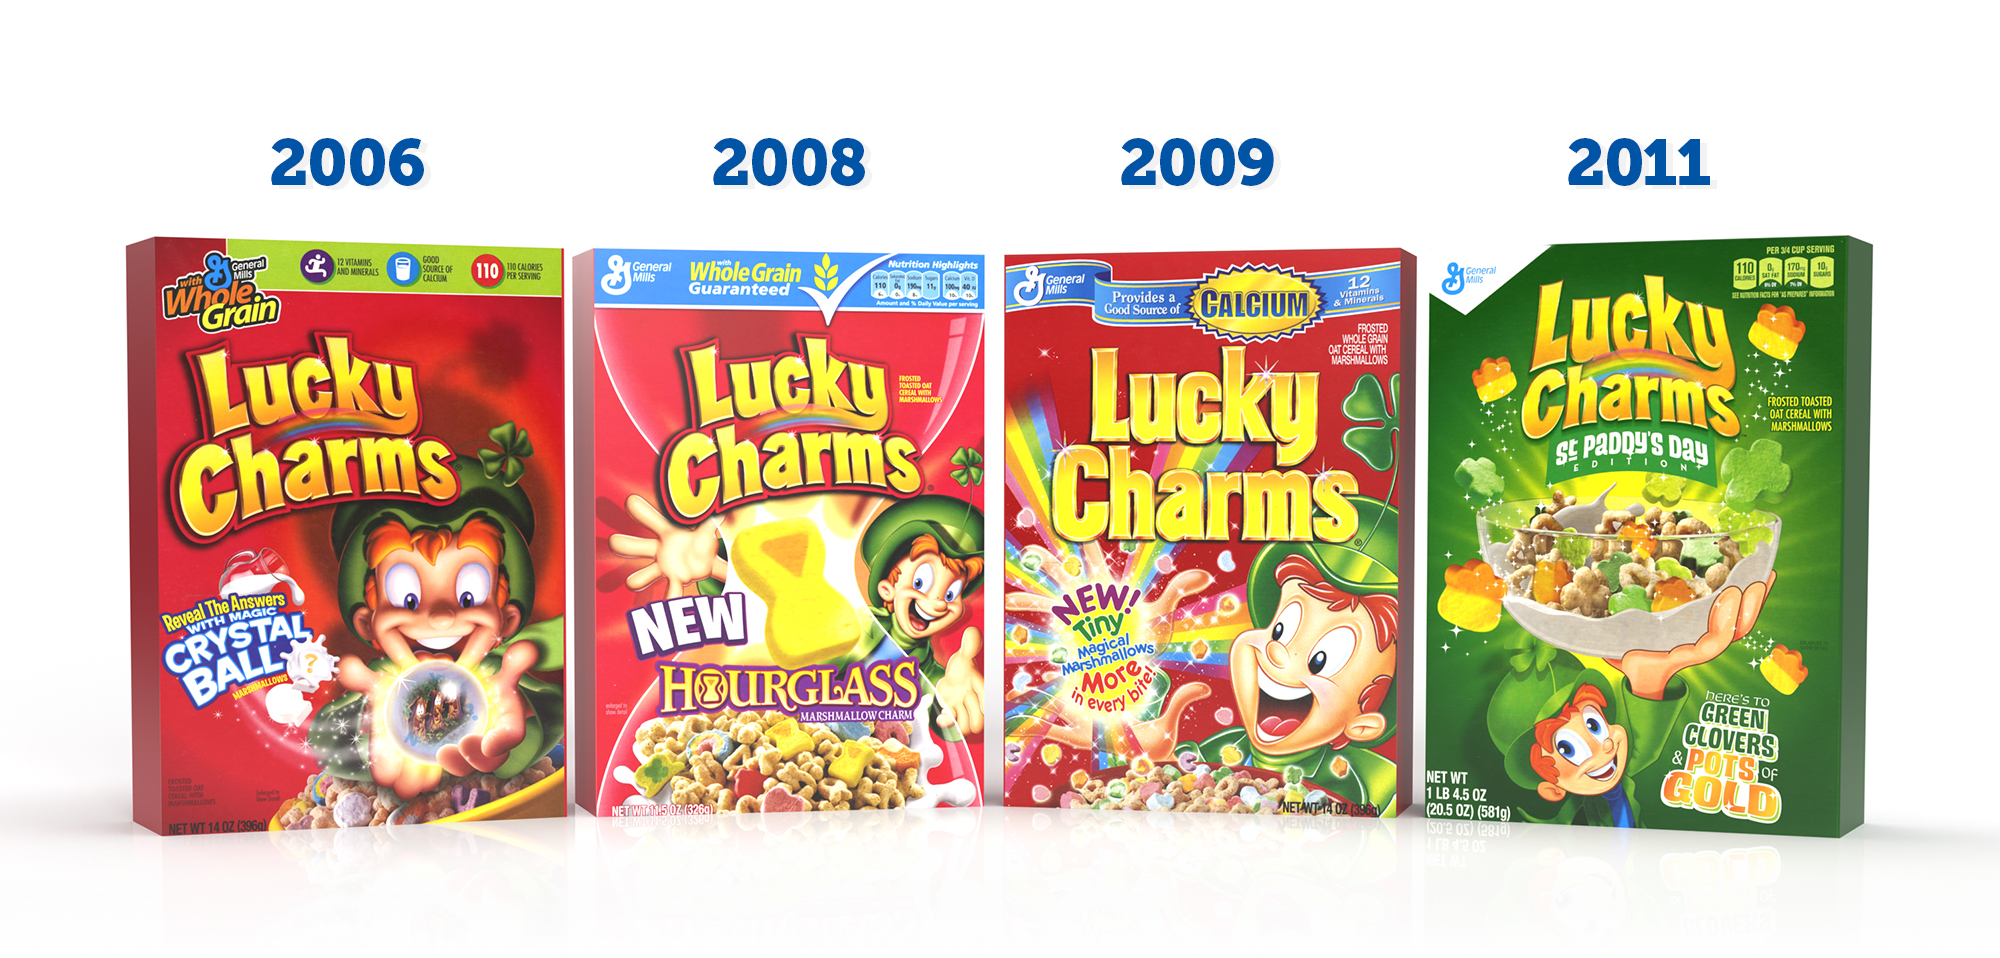 Lucky Charms boxes from 2006 to 2011